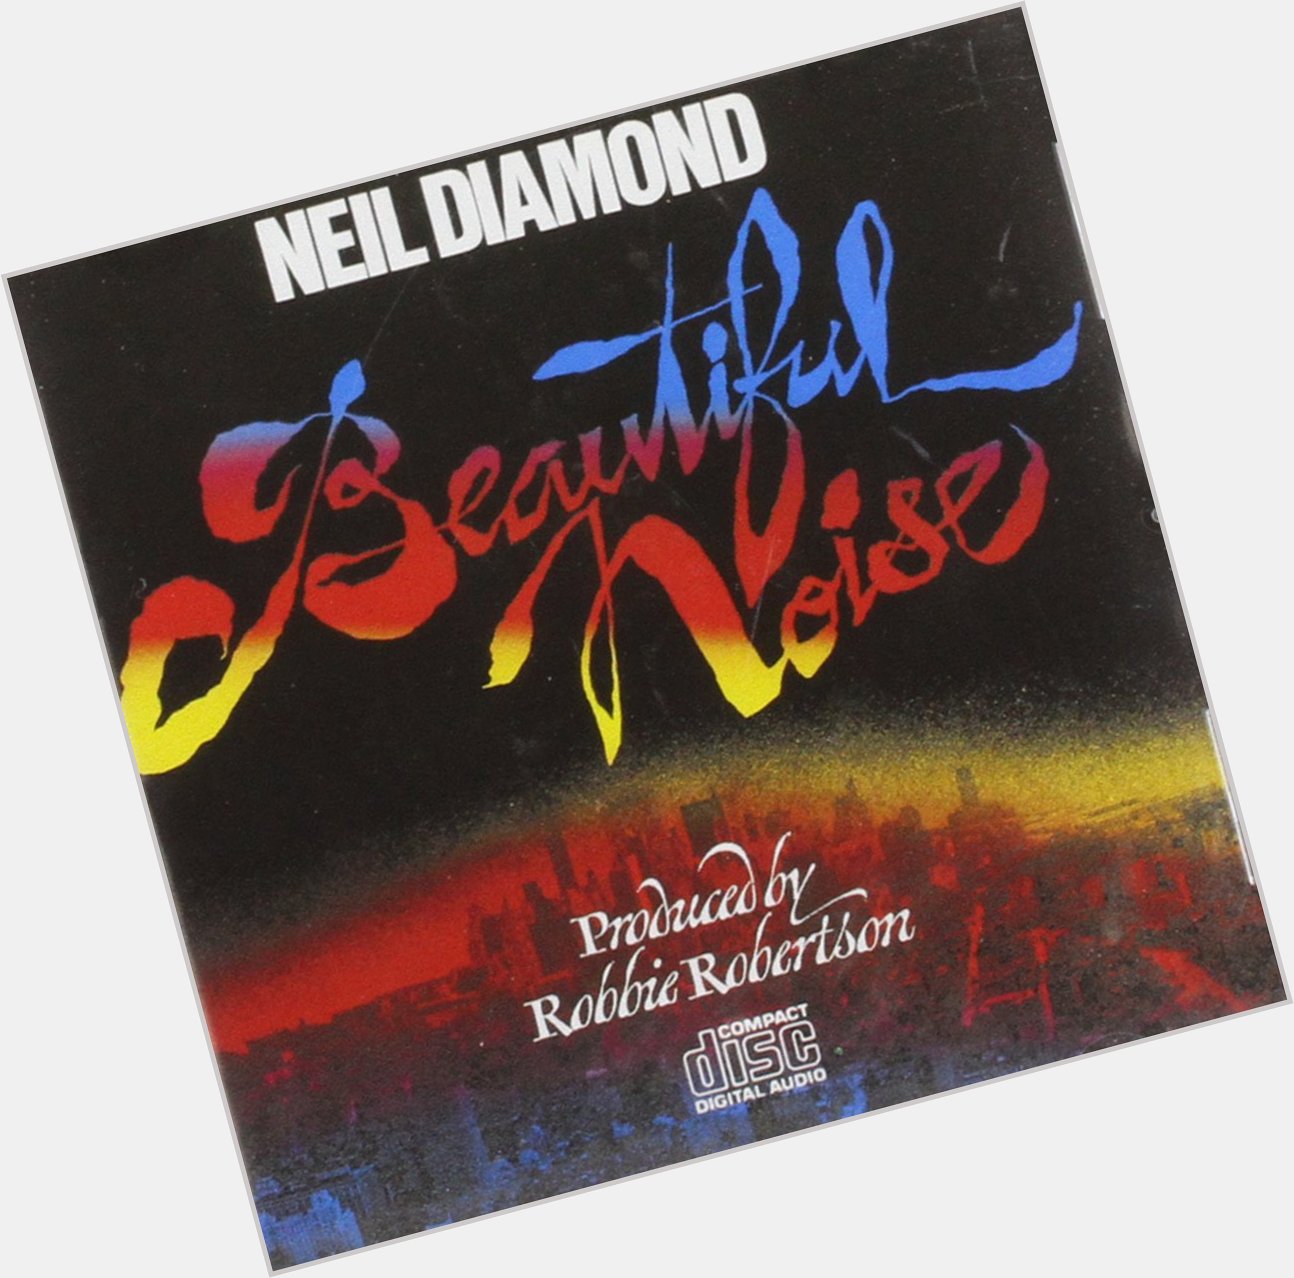 Happy Birthday to Neil Diamond! 
Thanks for all the beautiful music! 